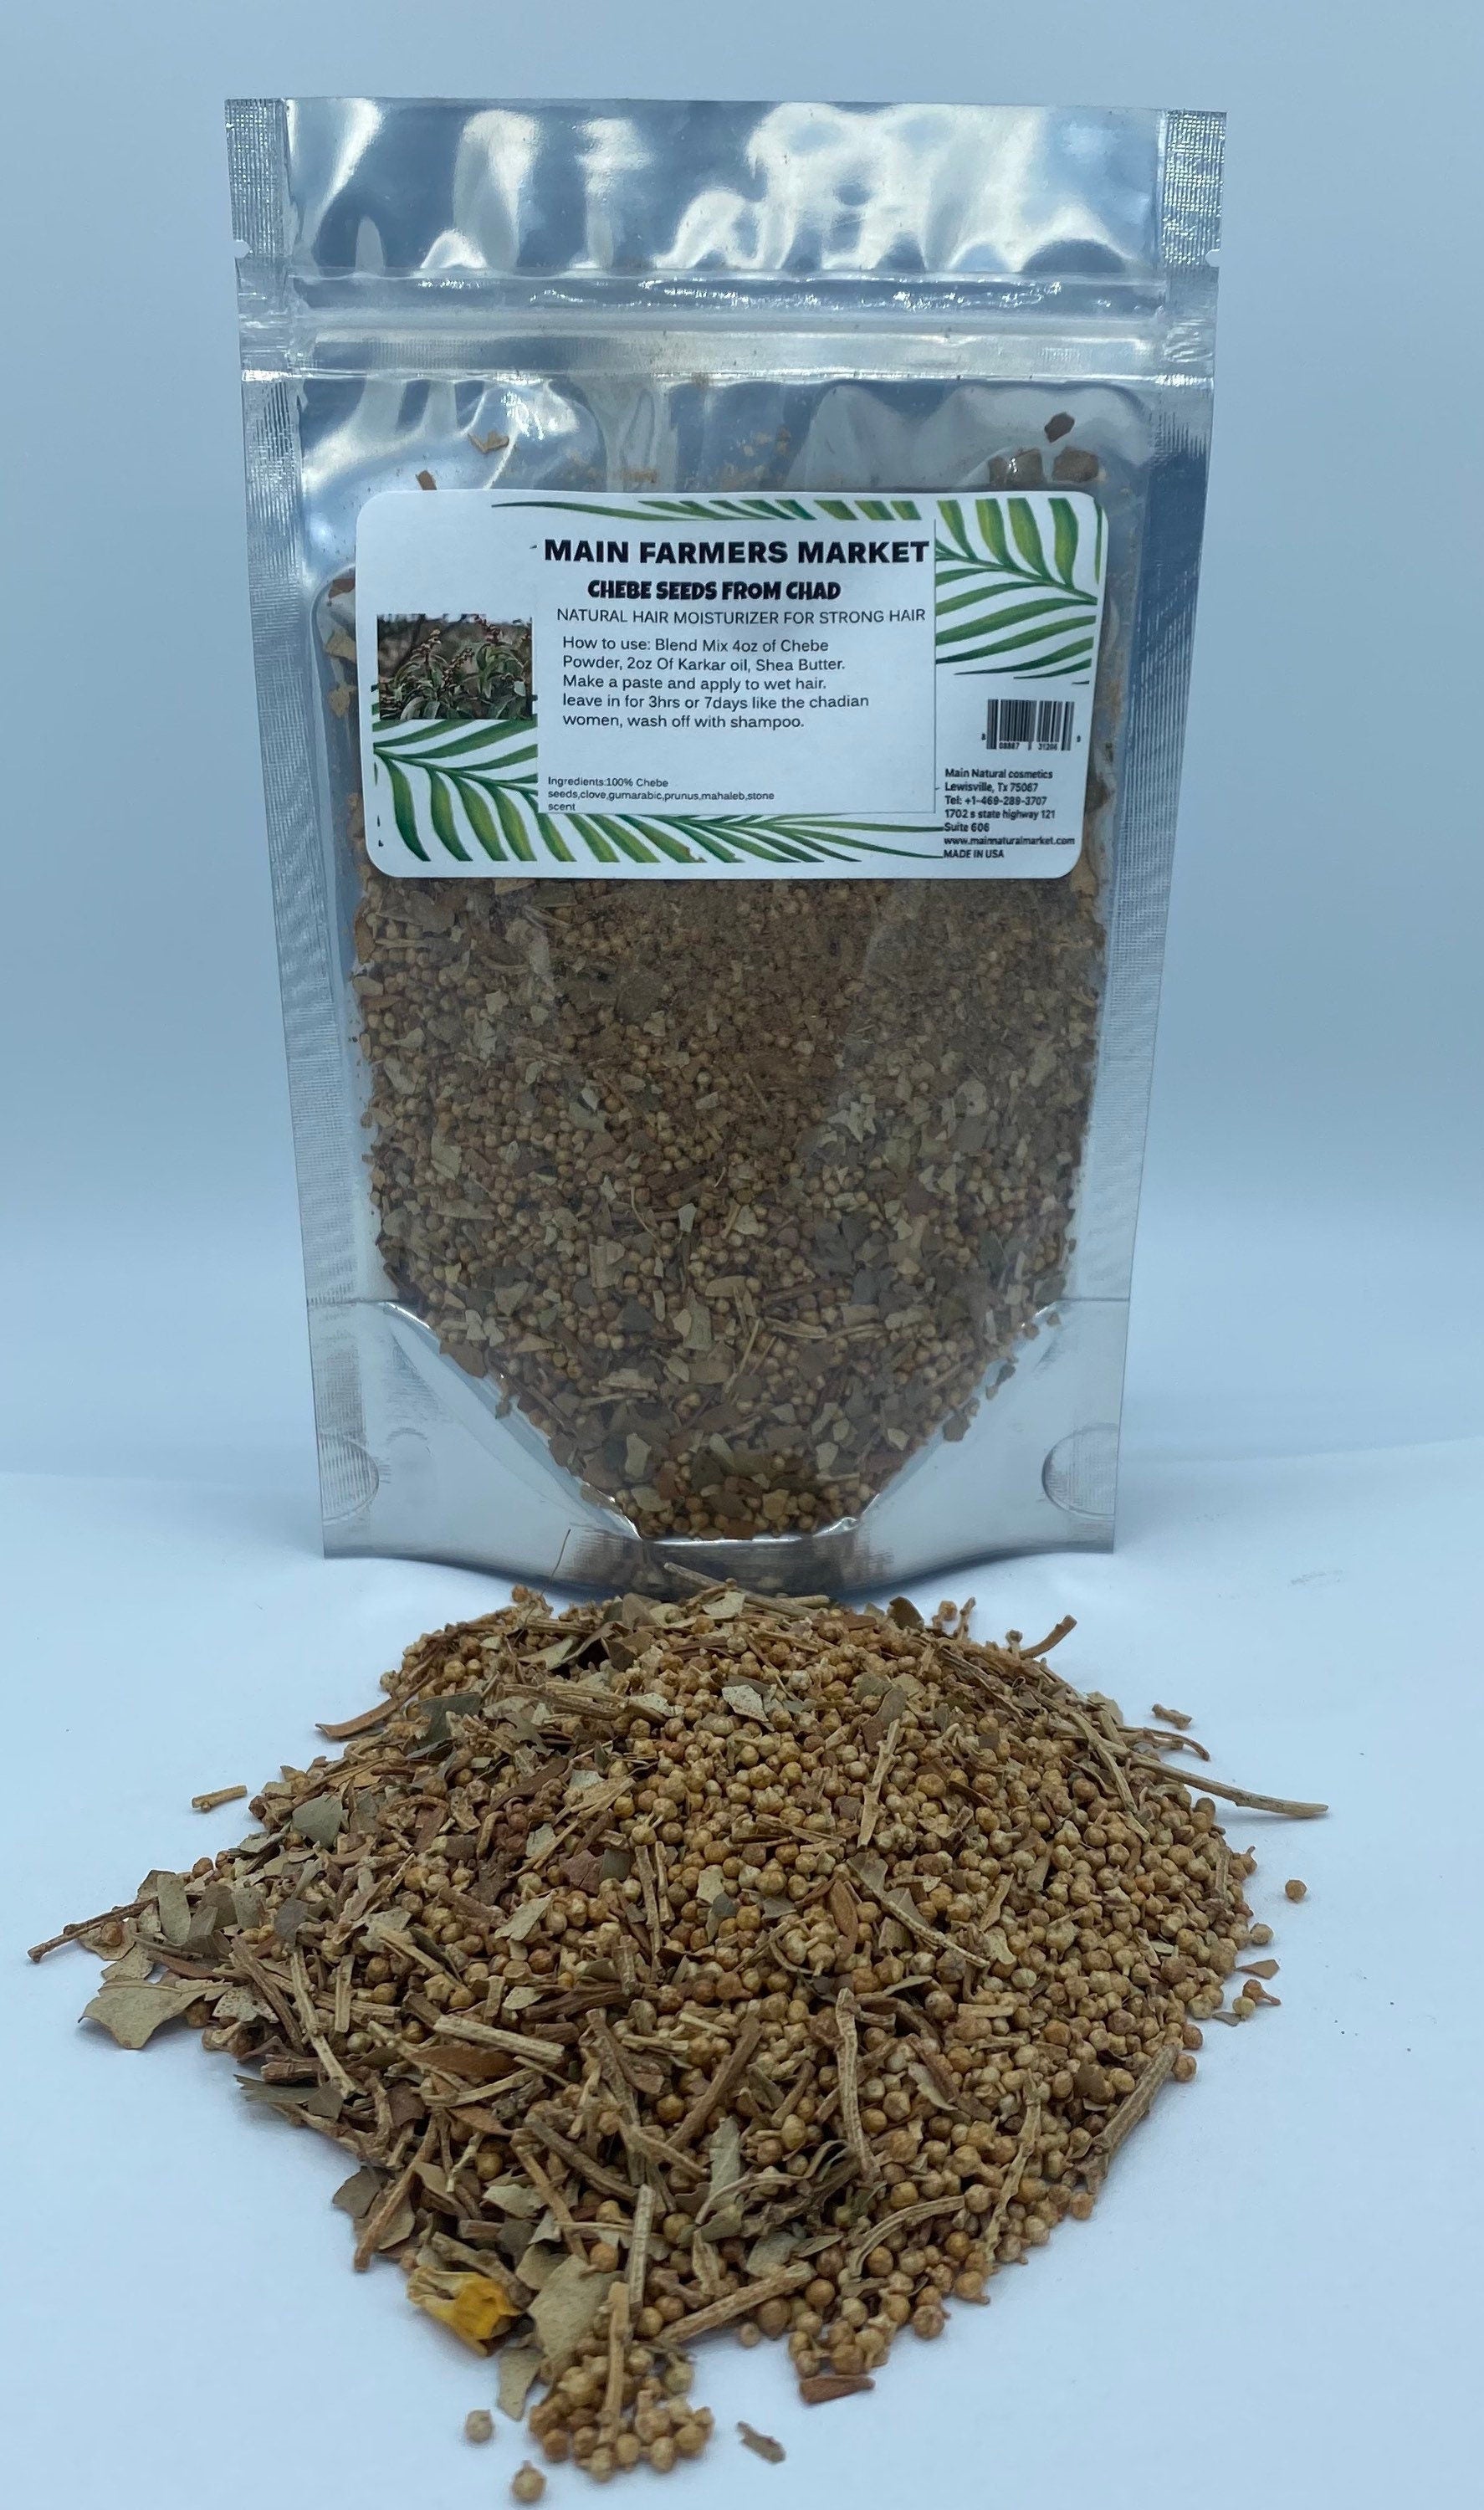 Authentic Unblended Chebe Seeds